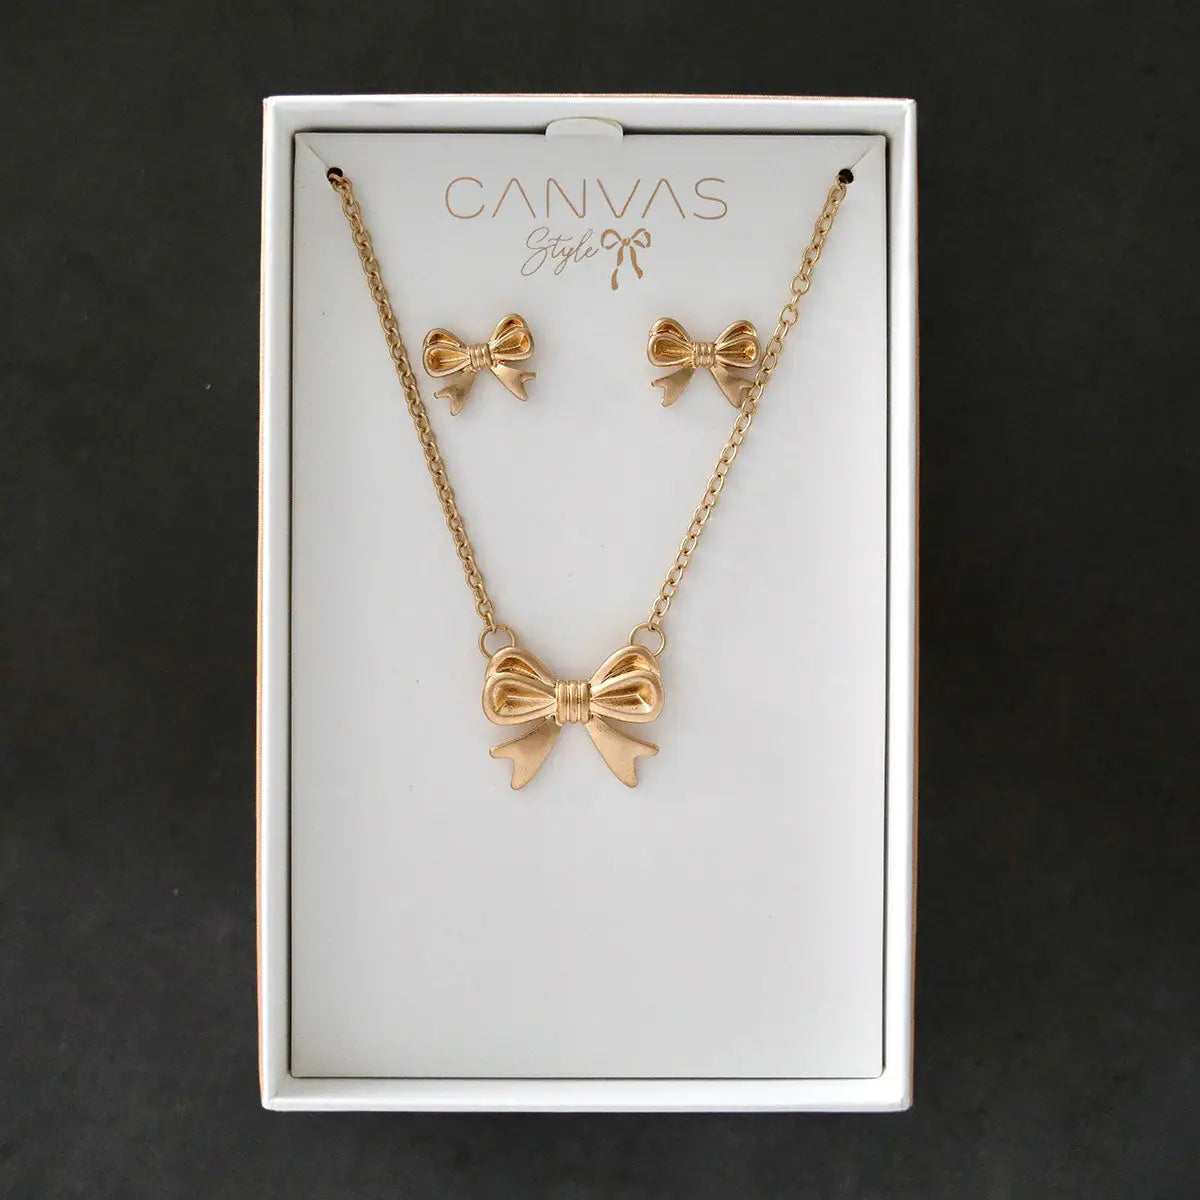 Stephanie Bow Earring and Necklace Set